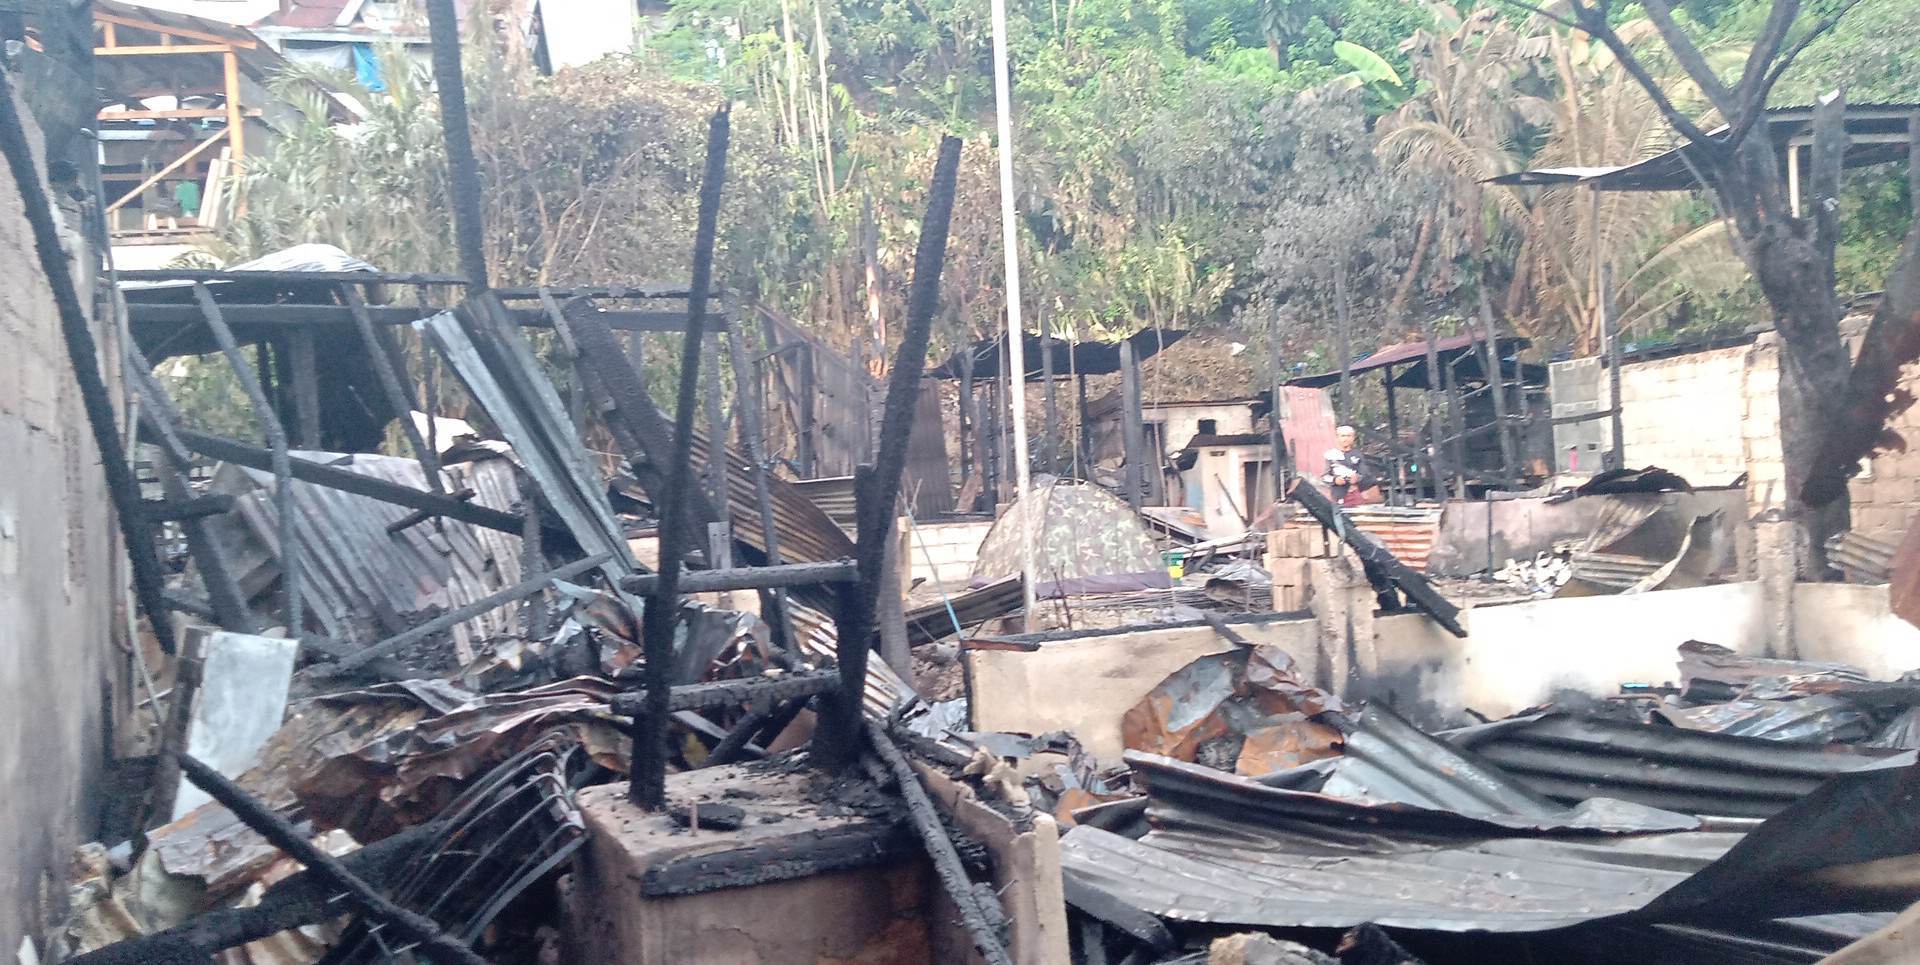 IN PHOTOS: Aftermath of fire in Jagobiao, Mandaue City | Cebu Daily News